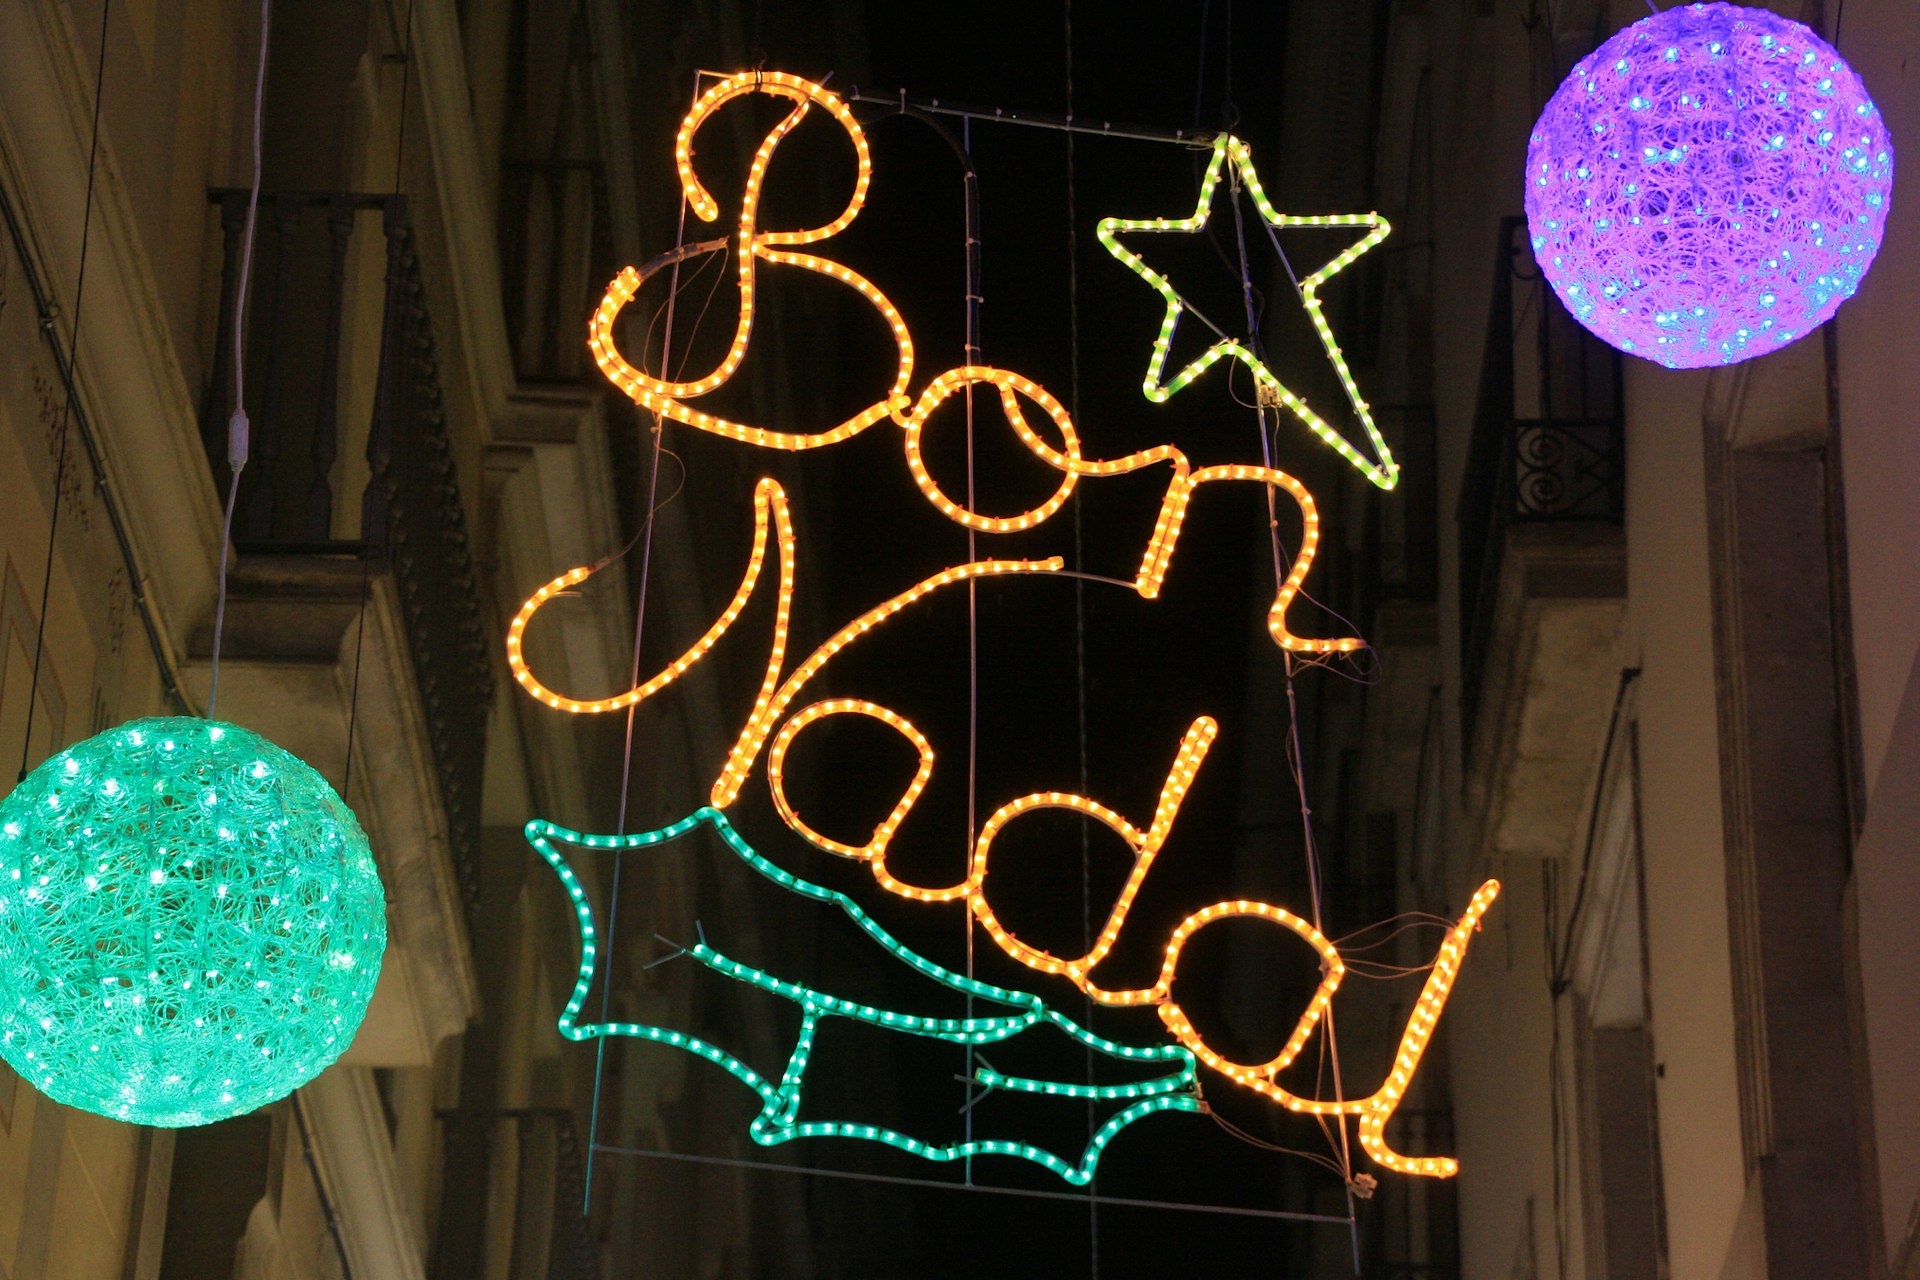 Festive lights on the Carrer Montsió. Image by Núria / CC BY-SA 2.0